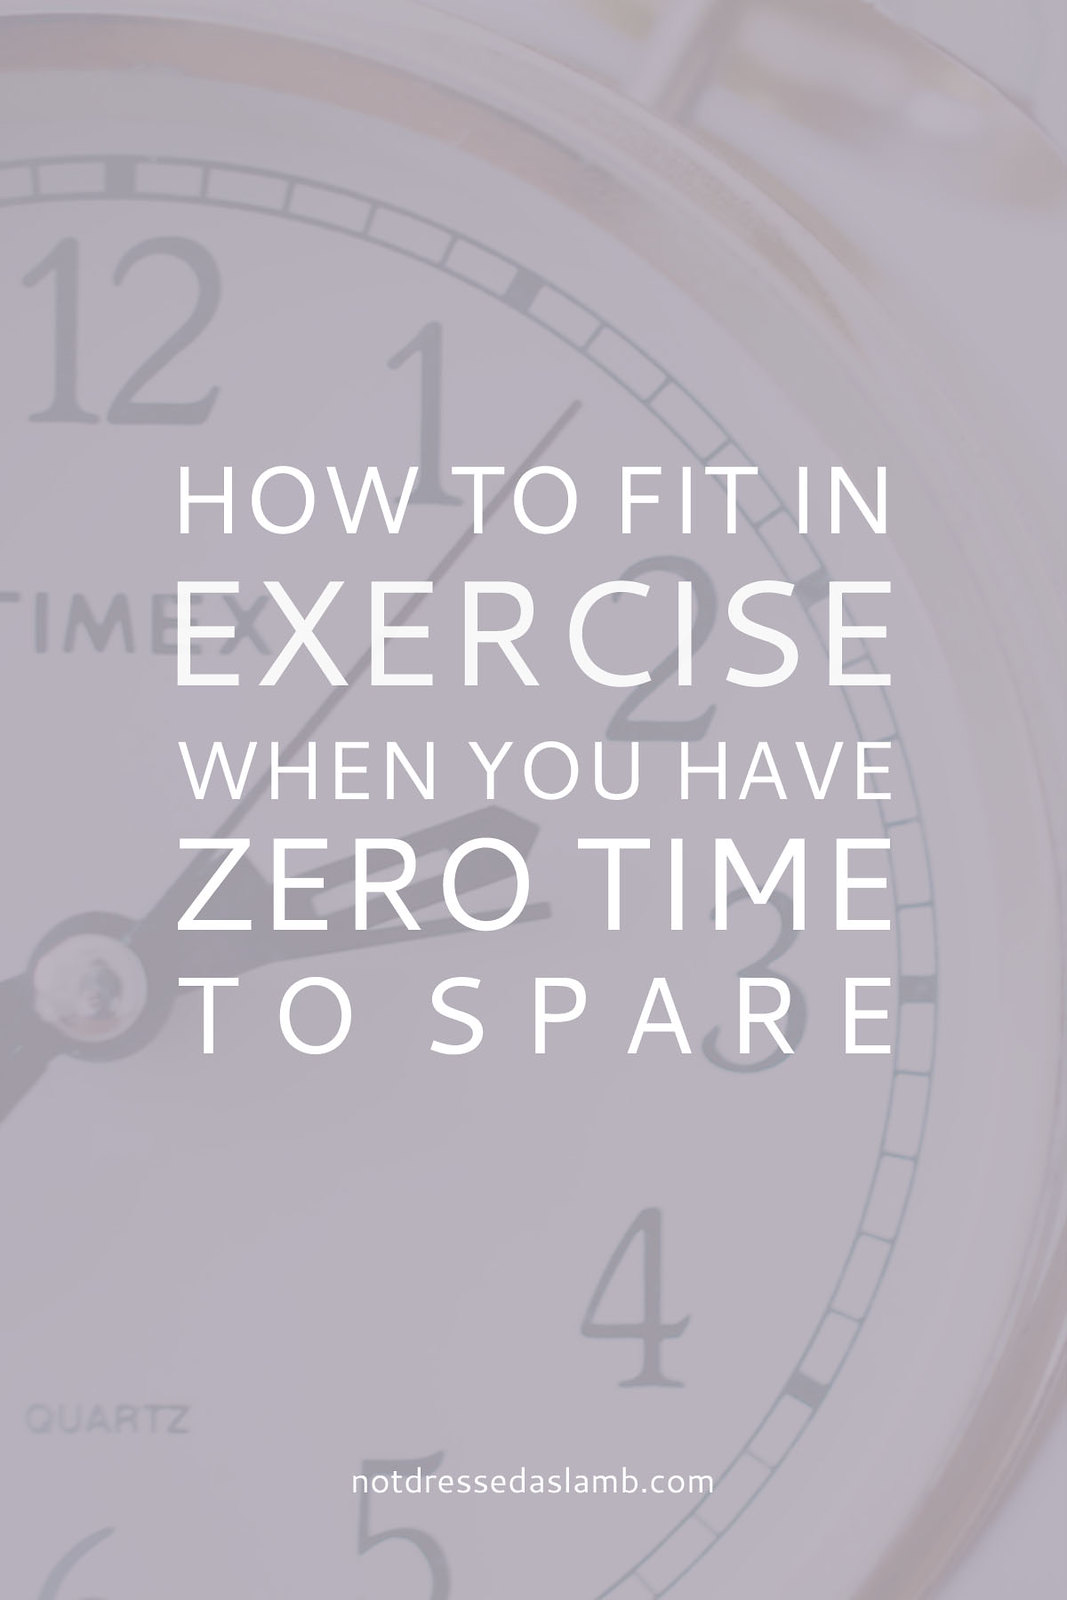 How to Fit in Exercise When You Have Zero Time to Spare | Not Dressed As Lamb #notlambFIT